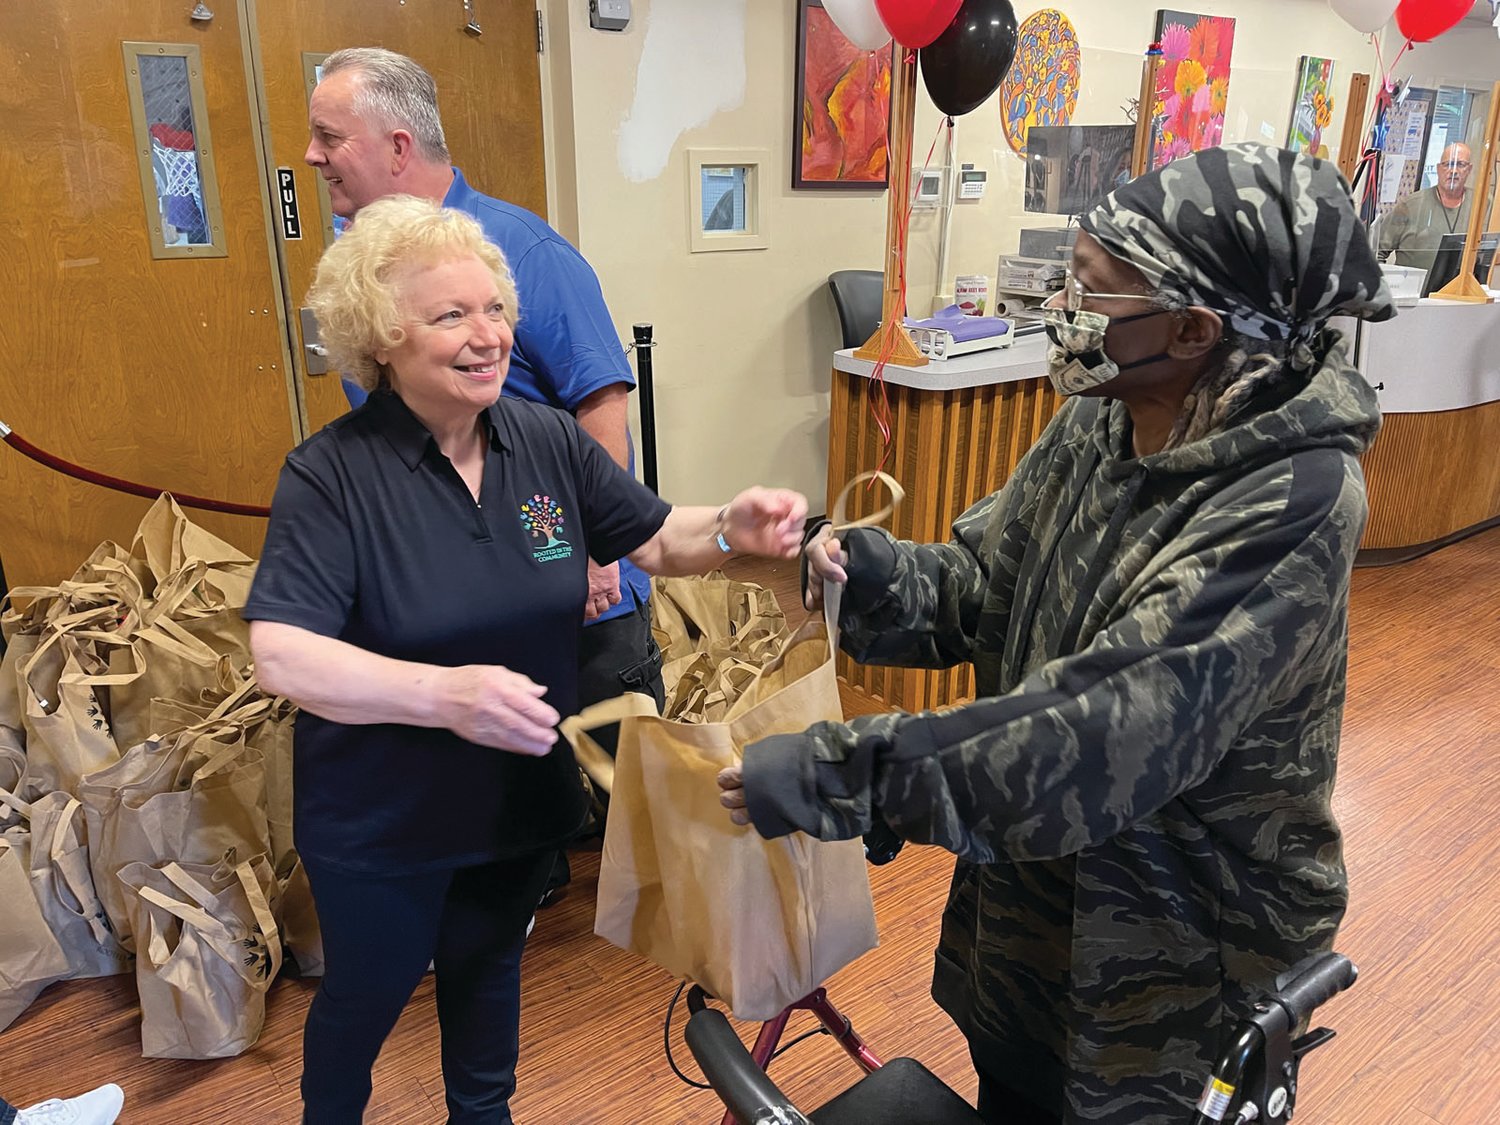 REASON TO SMILE: Rita Penzo, a volunteer at the Cranston Senior Enrichment Center, handed out gift bags to the seniors arriving for Tuesday’s event. “It’s been tough,” she said of the past year.